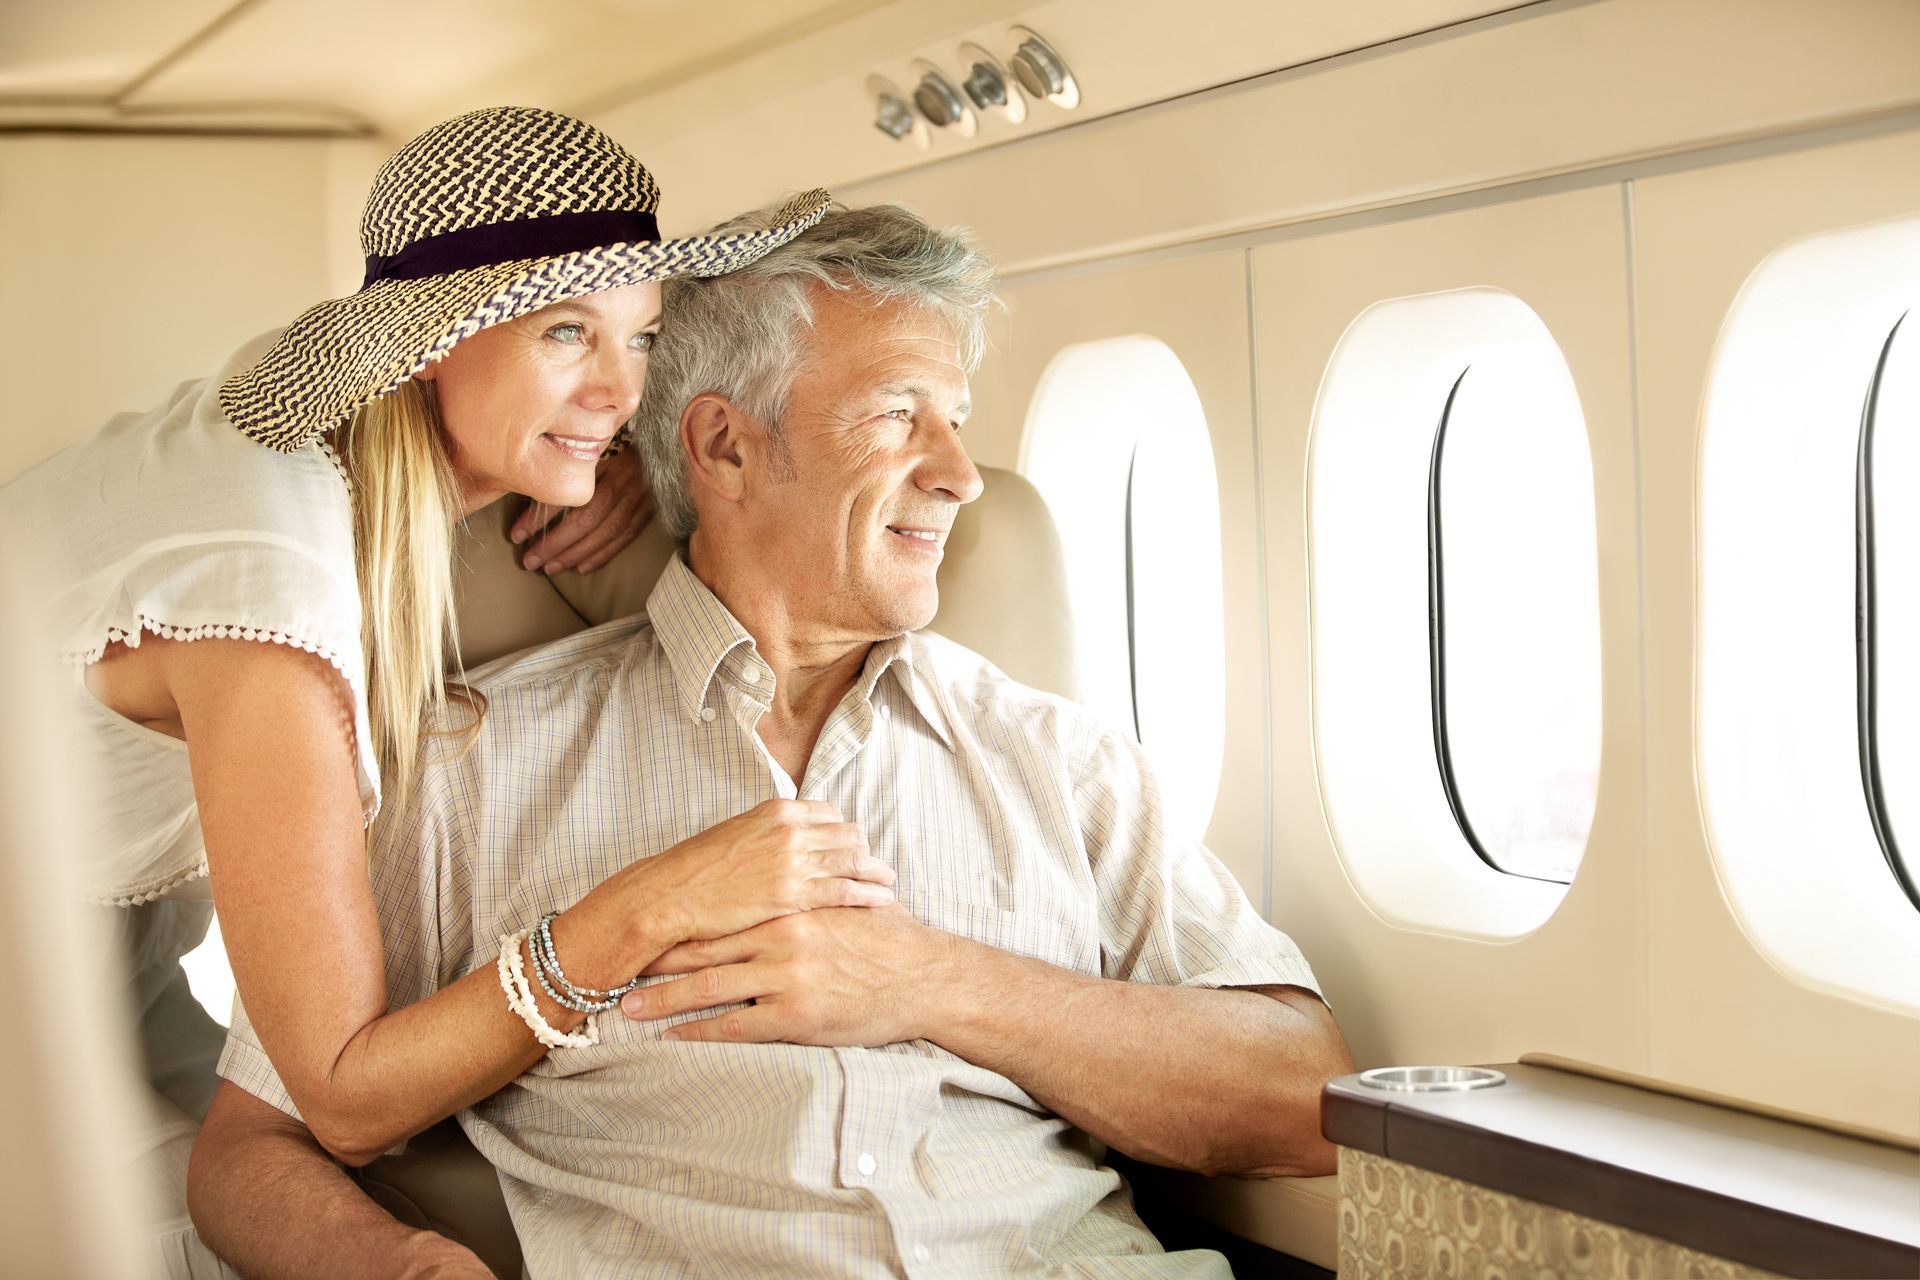 A woman is hugging an older man on an airplane.